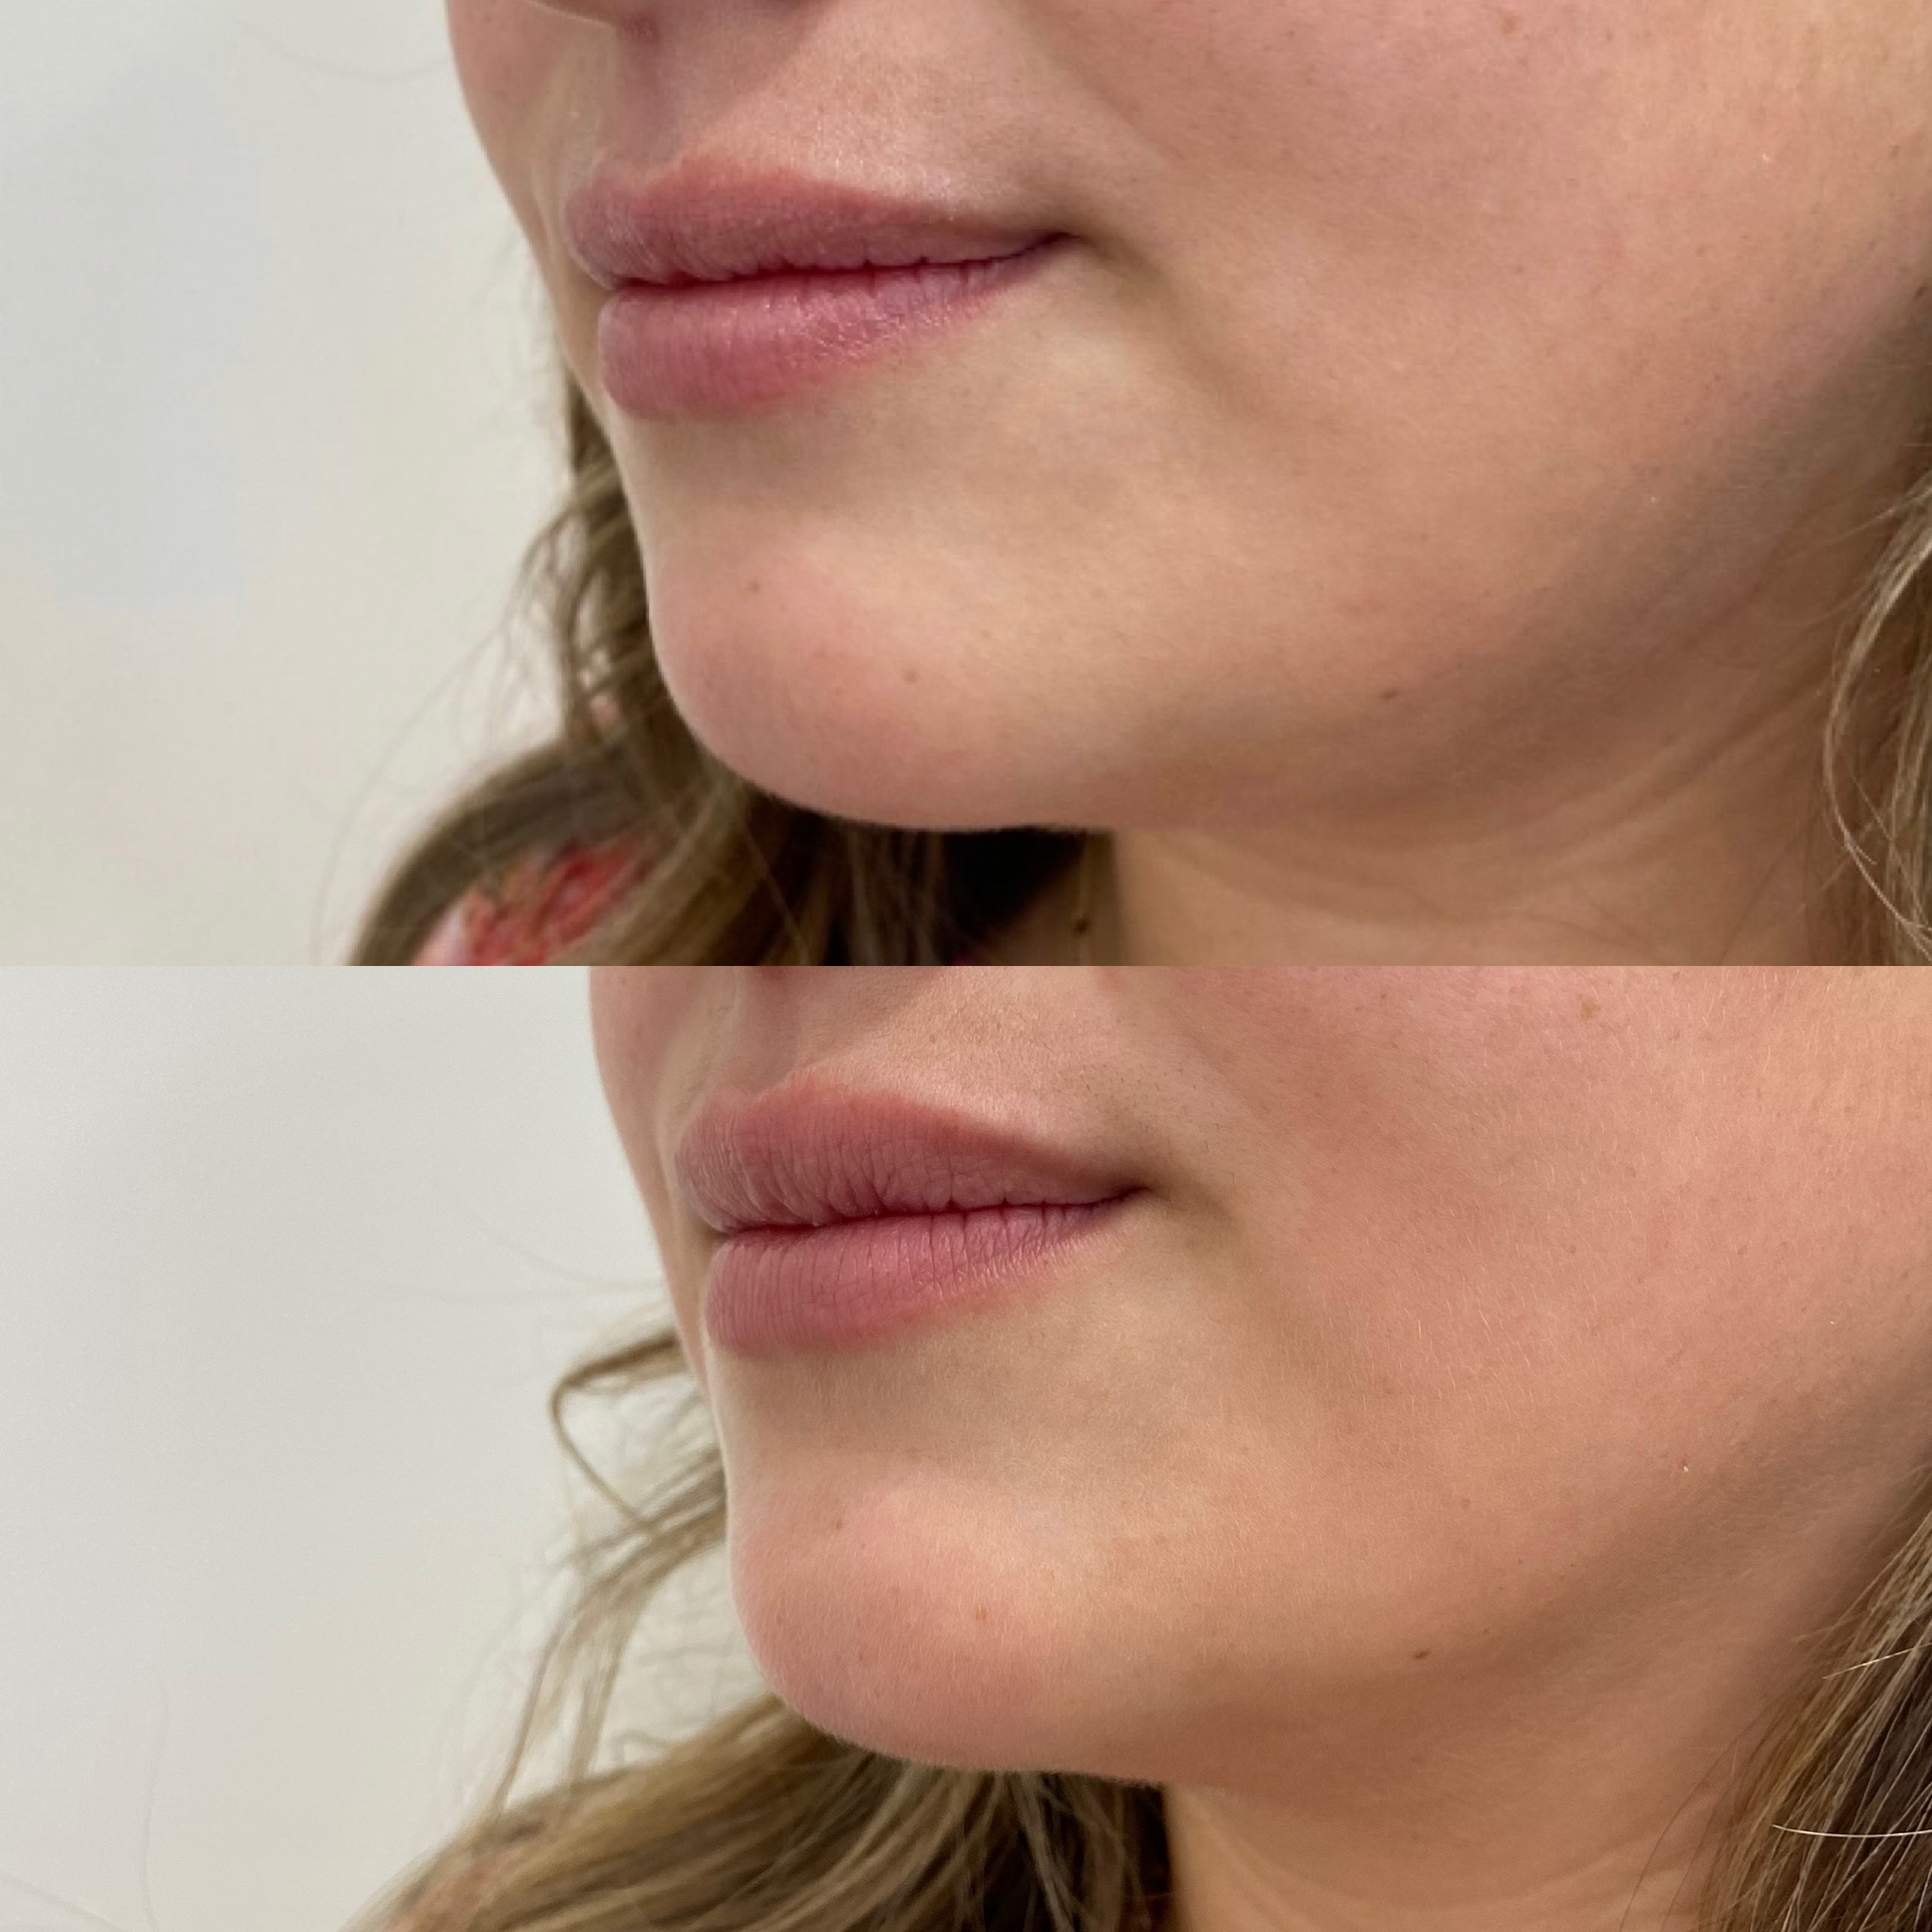 Before and After Lip lines Treatment | Beauty Boost Med Spa in Newport Beach, CA